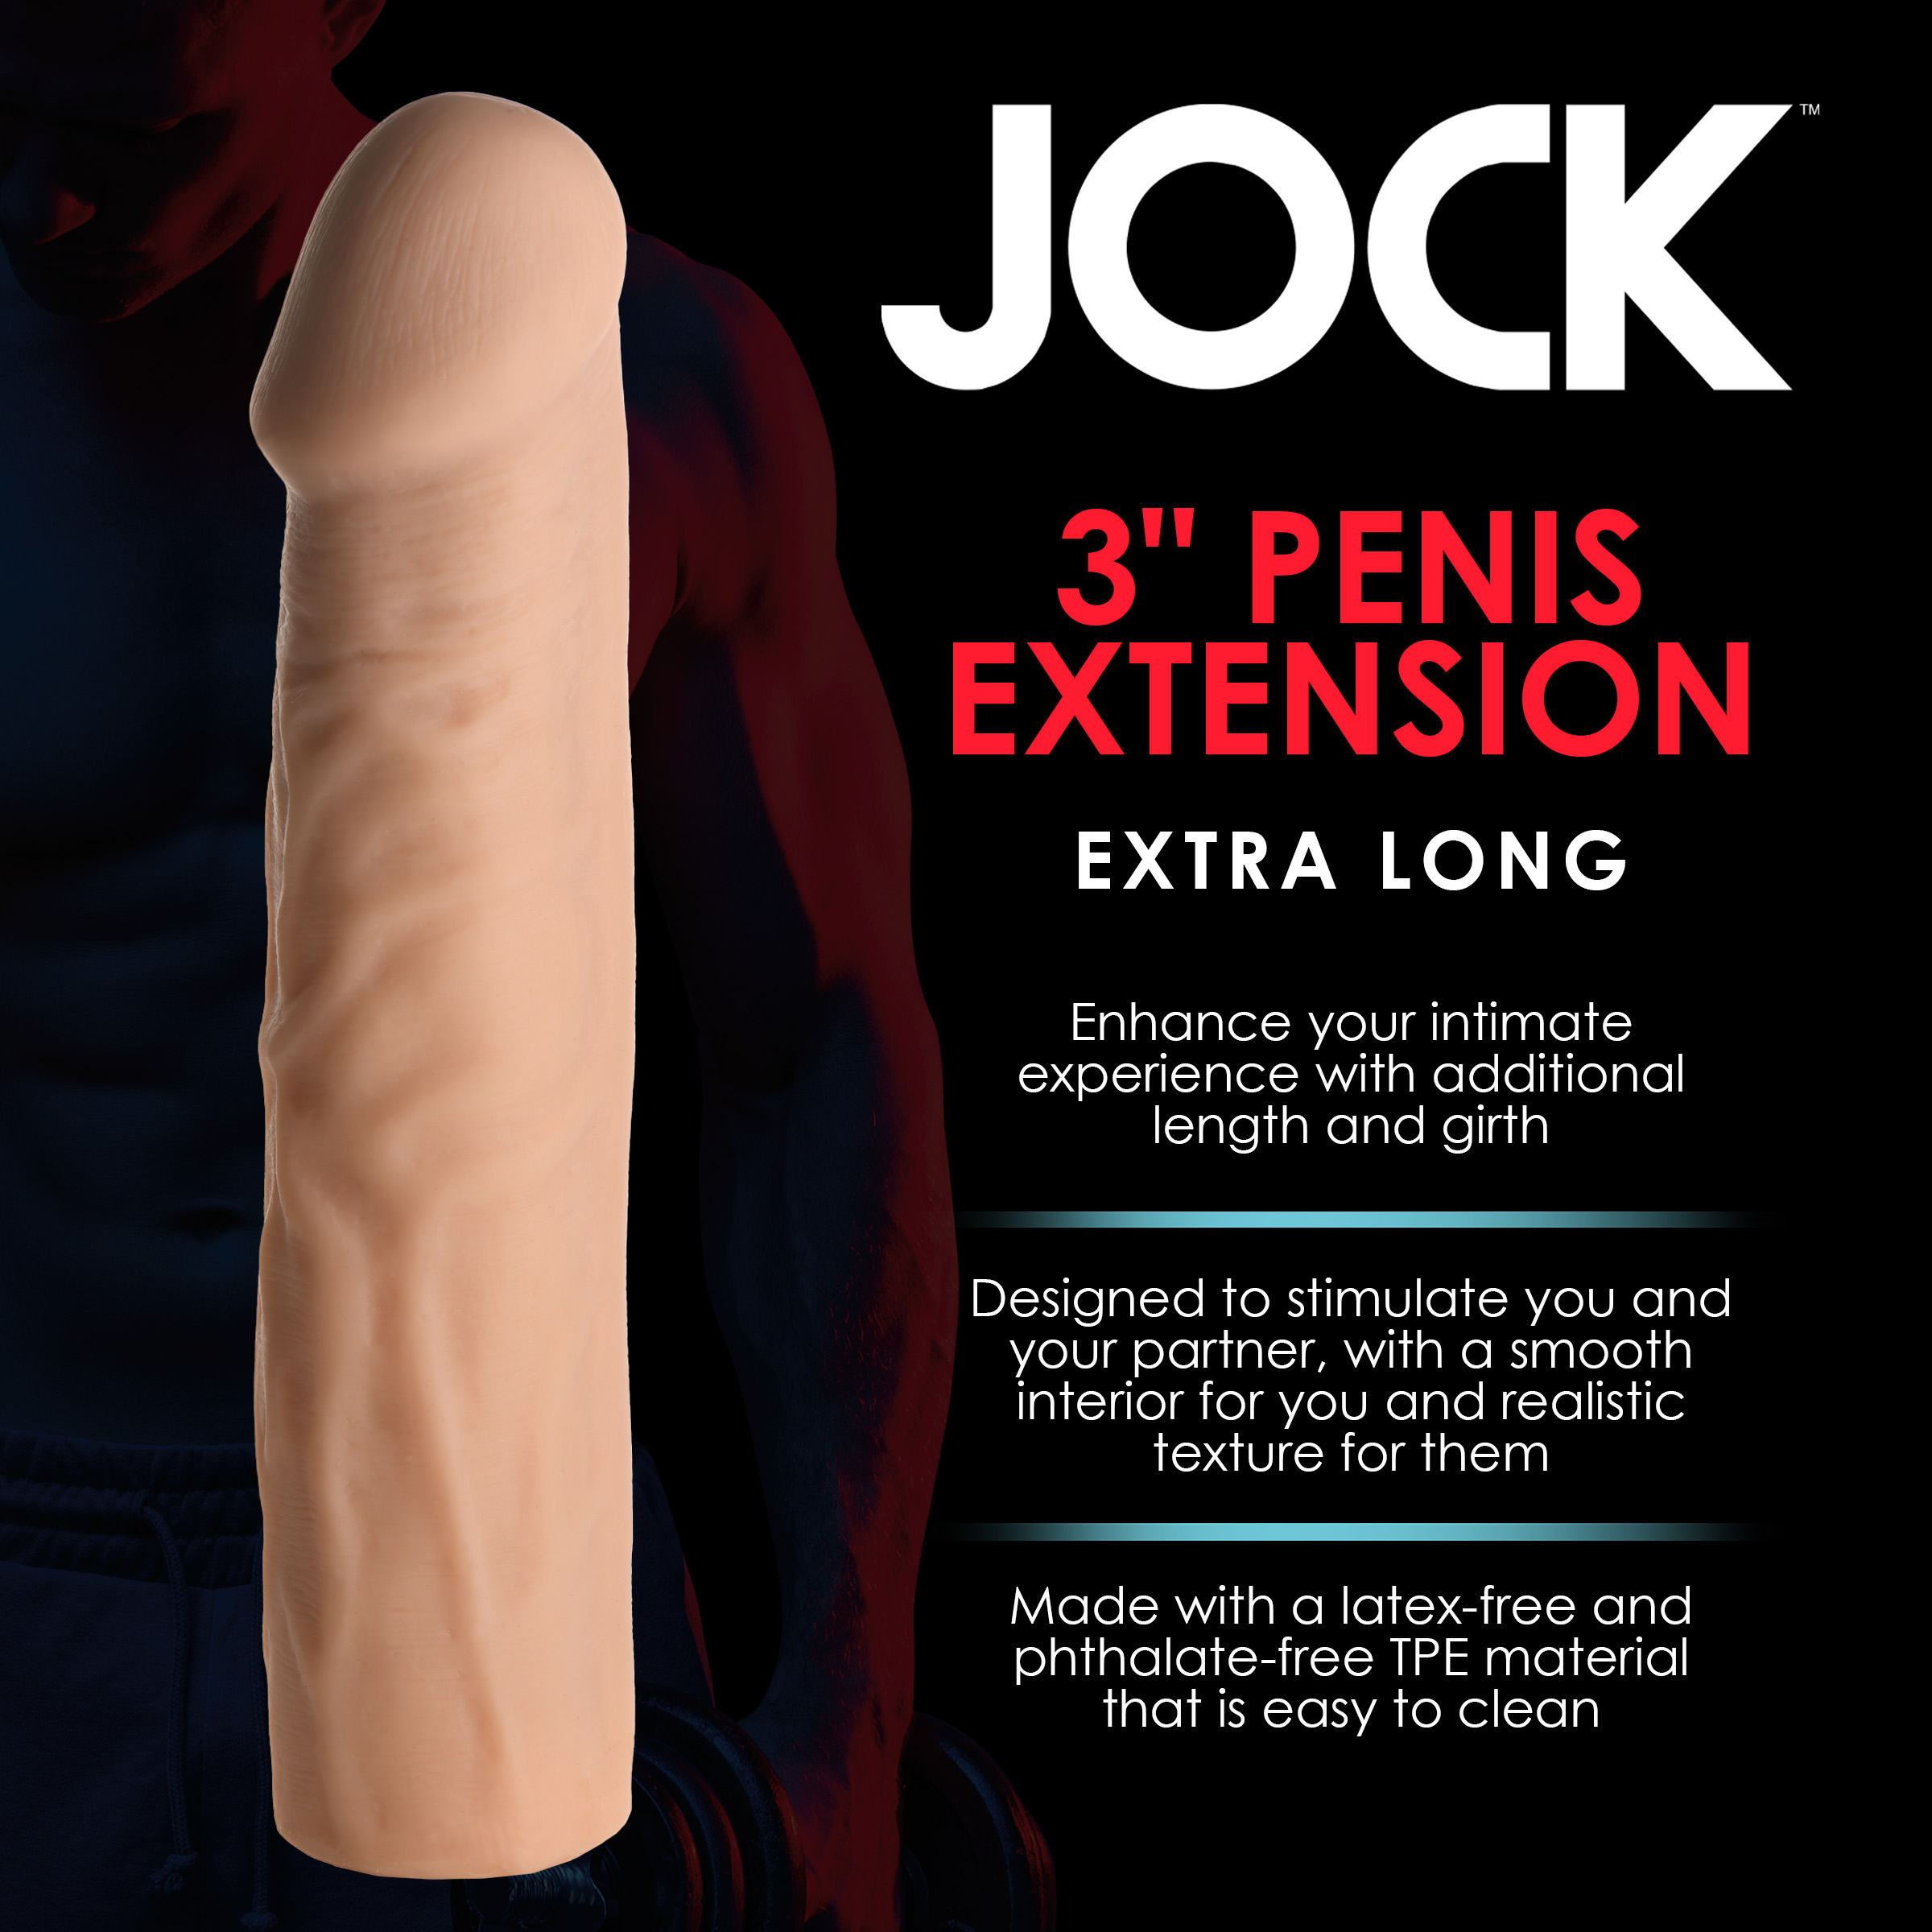 Extra Long 3 Inch Penis Extension – Light